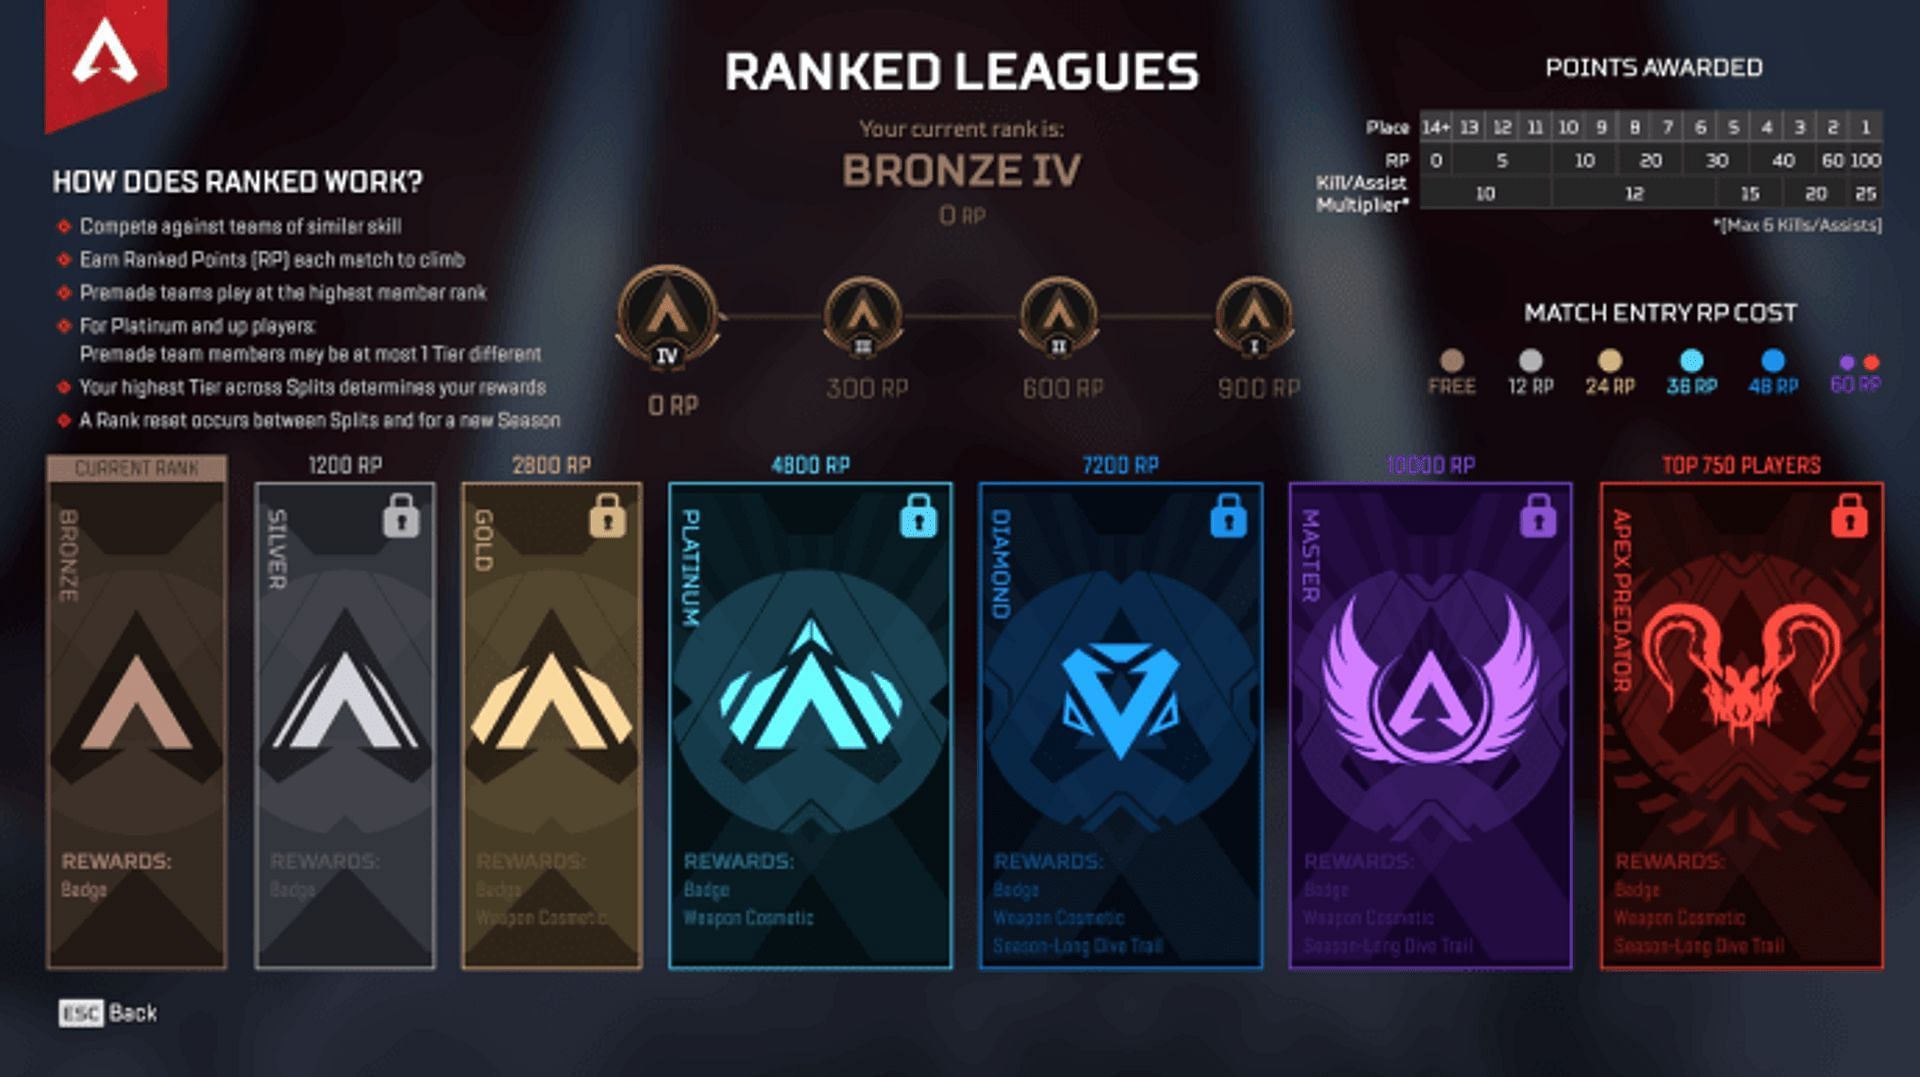 The rank details screen as seen in-game (Image via EA)